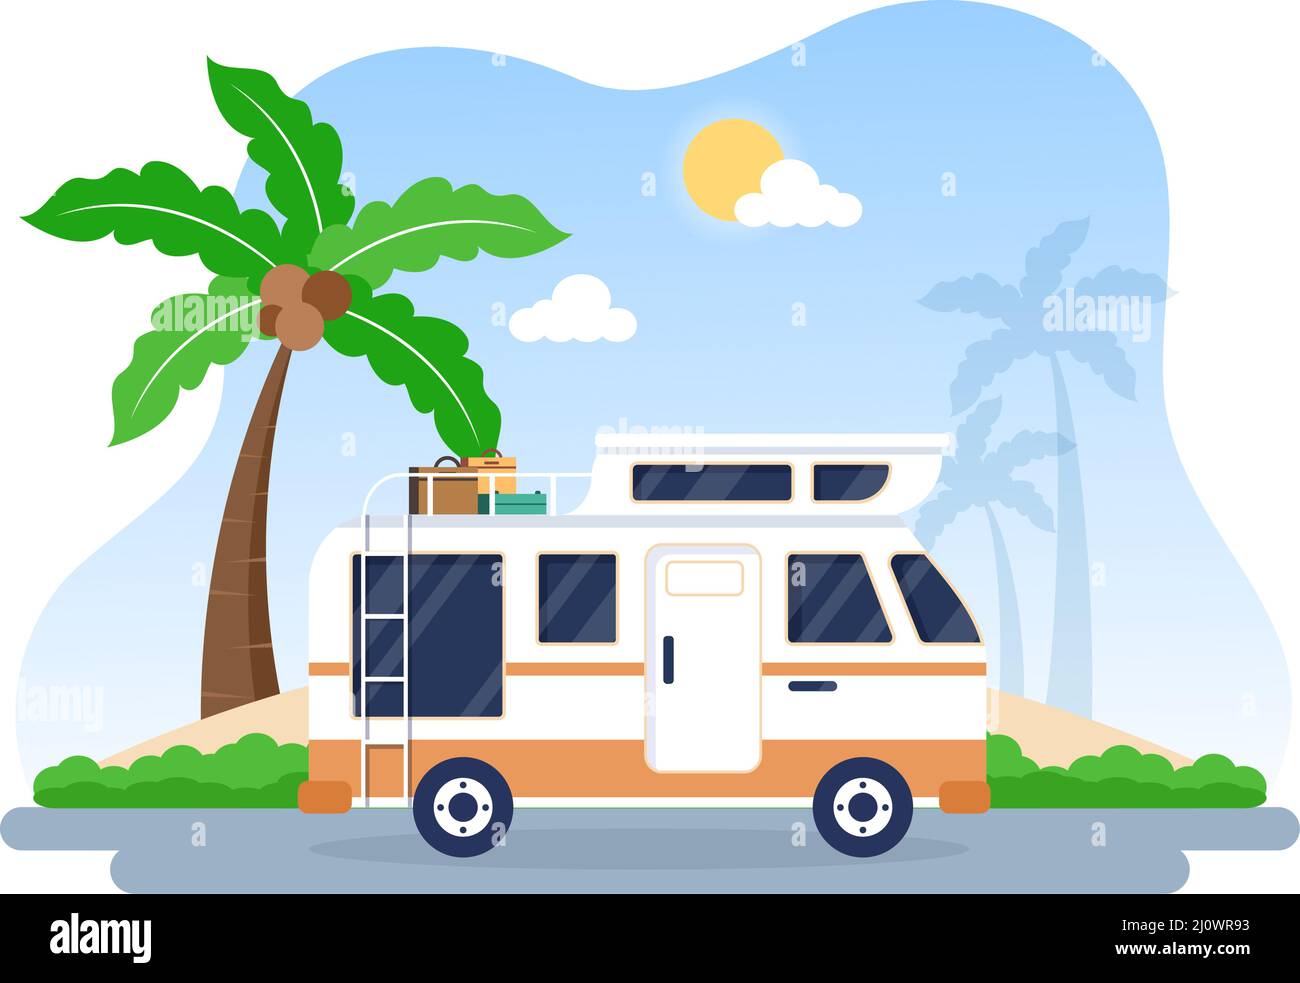 Camping Car Background Illustration with Tent, Camper Car and Equipment for People on Adventure Tours or Holidays in the Beach Stock Vector